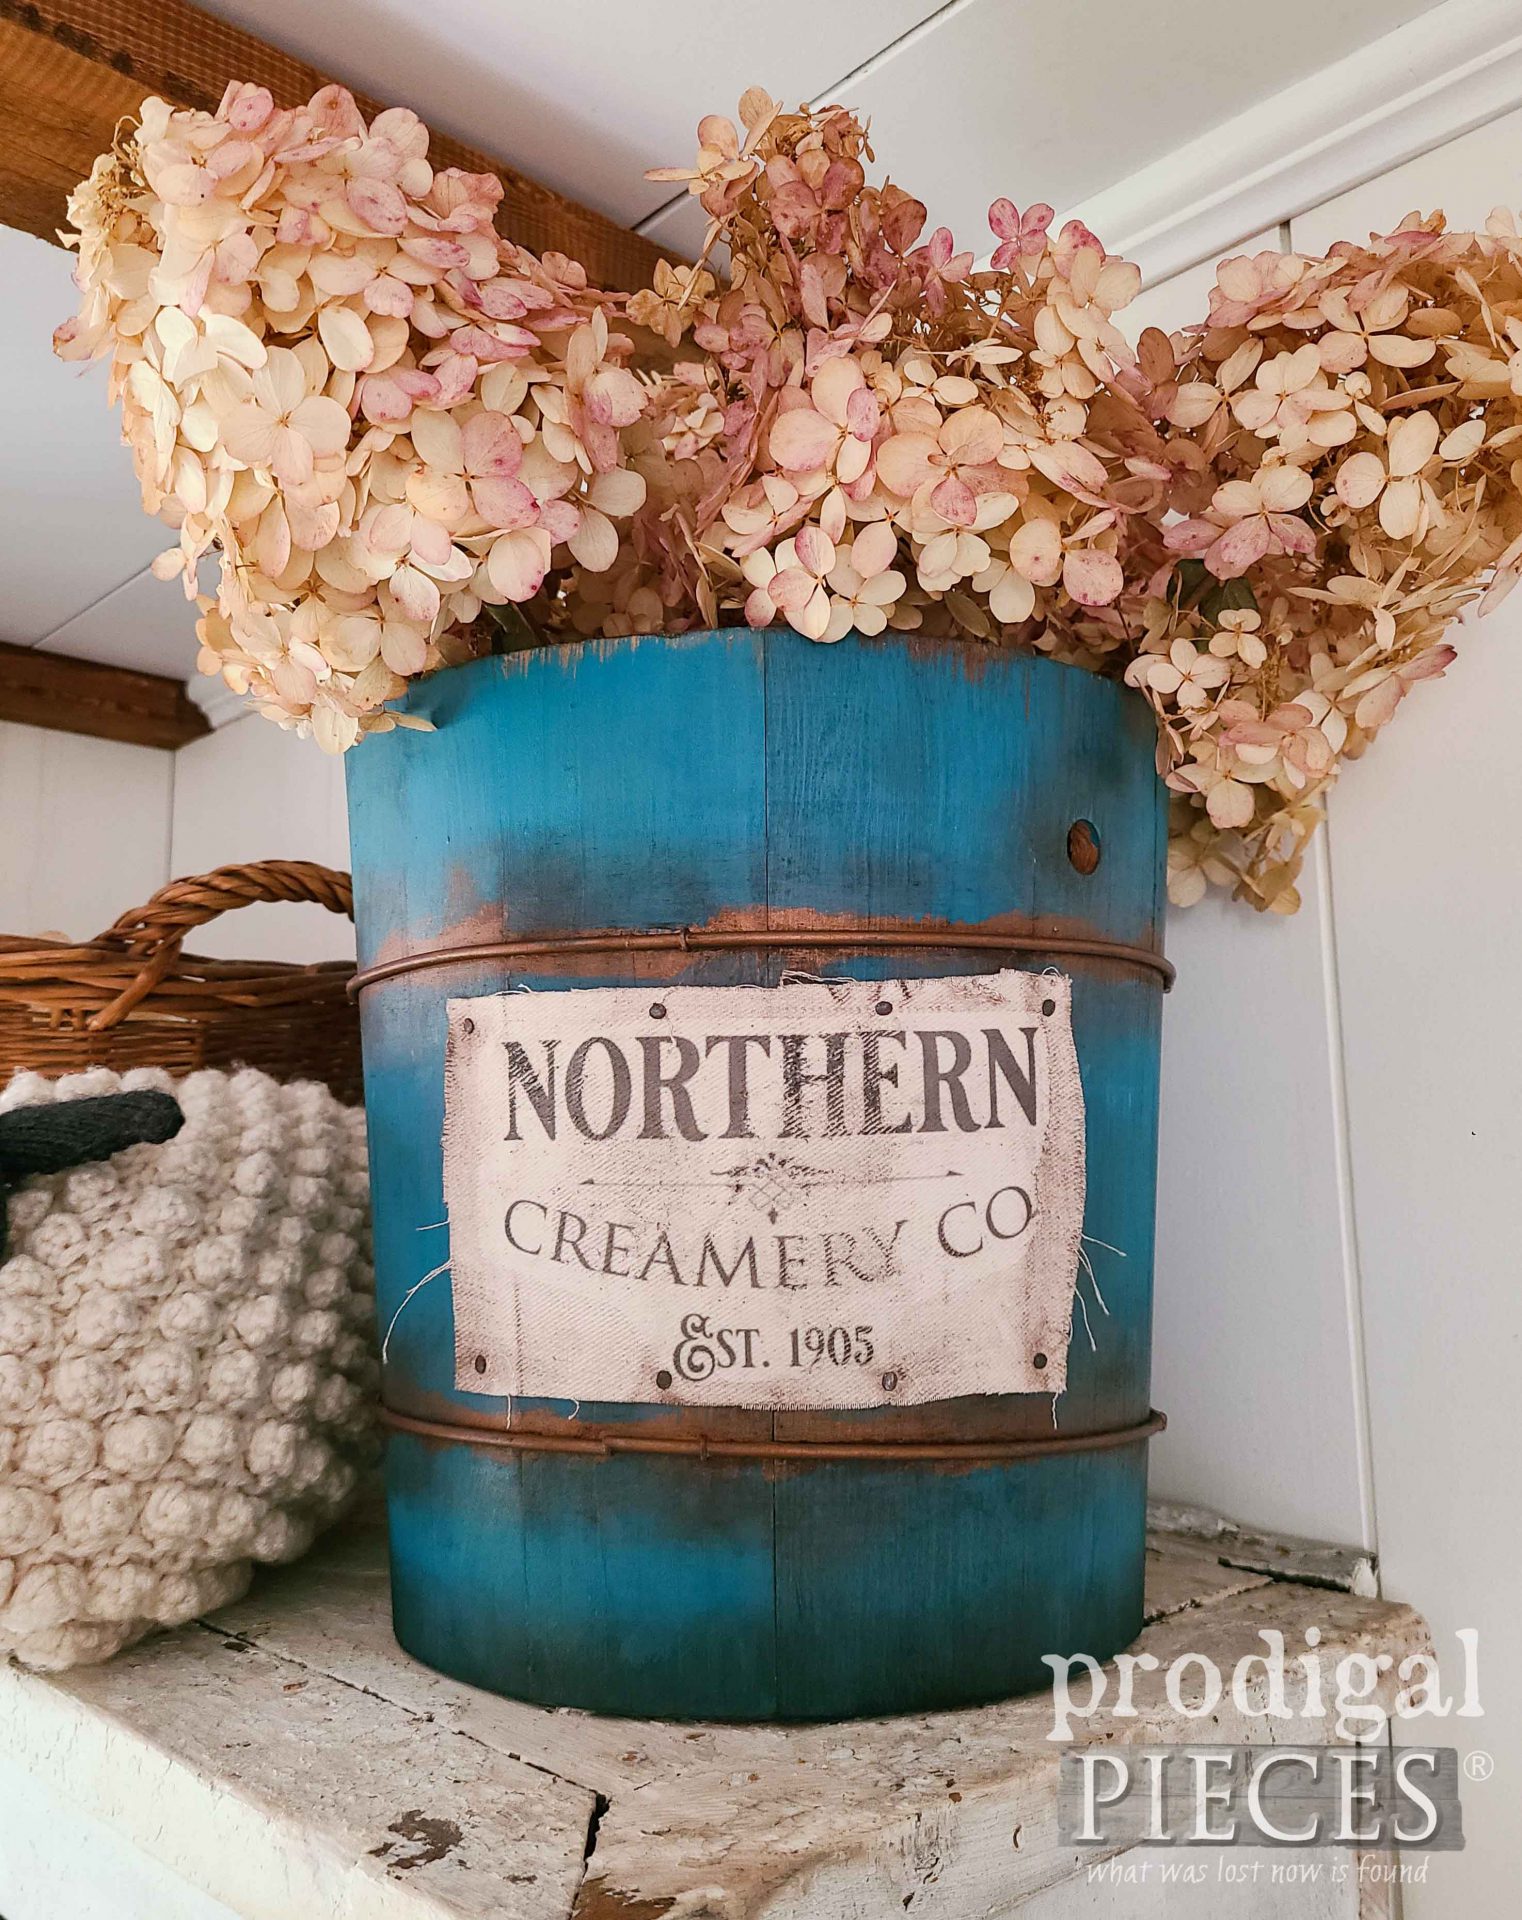 Rustic Teal Blue Vintage Ice Cream Bucket Makeover by Larissa of Prodigal Pieces | prodigalpieces.com #prodigalpieces #diy #homedecor